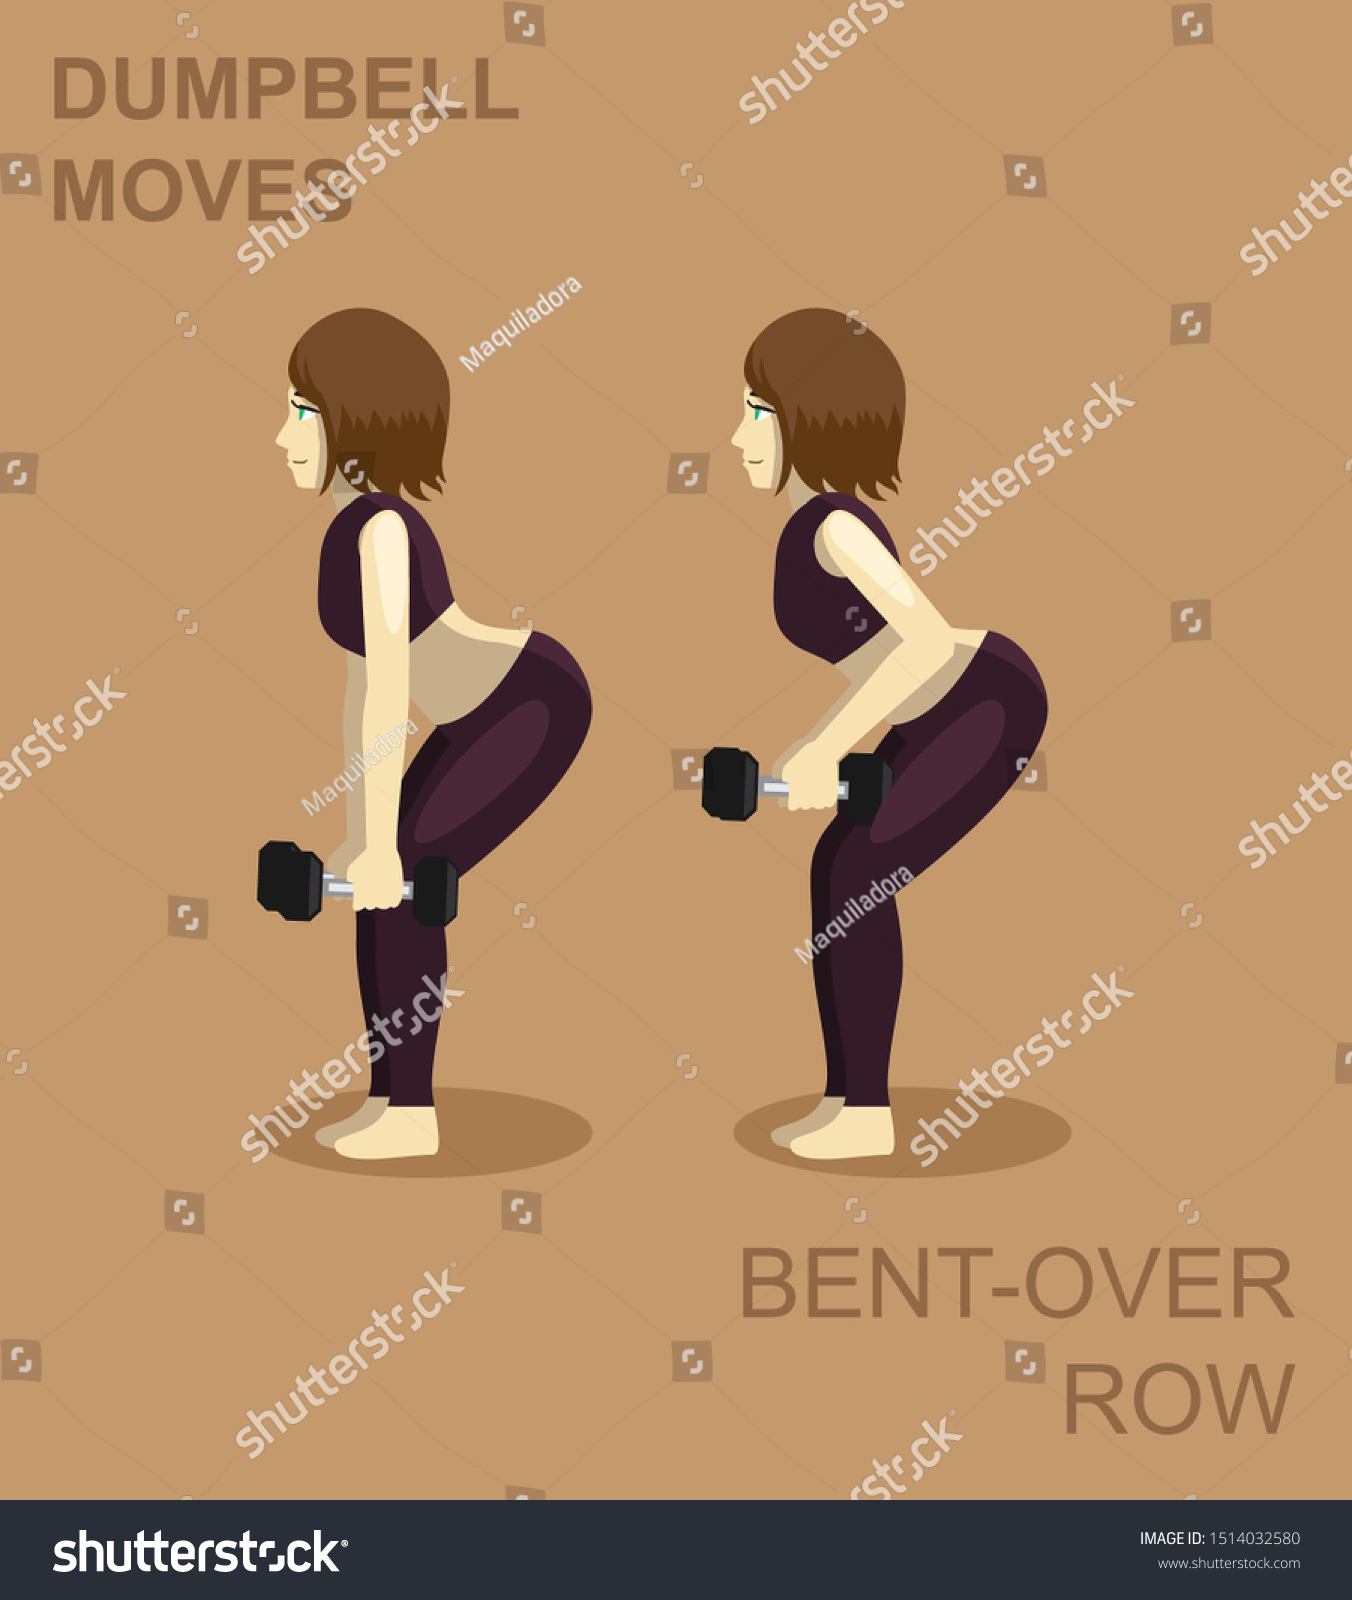 Bent Over Row Dumpbell Moves Manga Gym Set Royalty Free Stock Vector 1514032580 8335